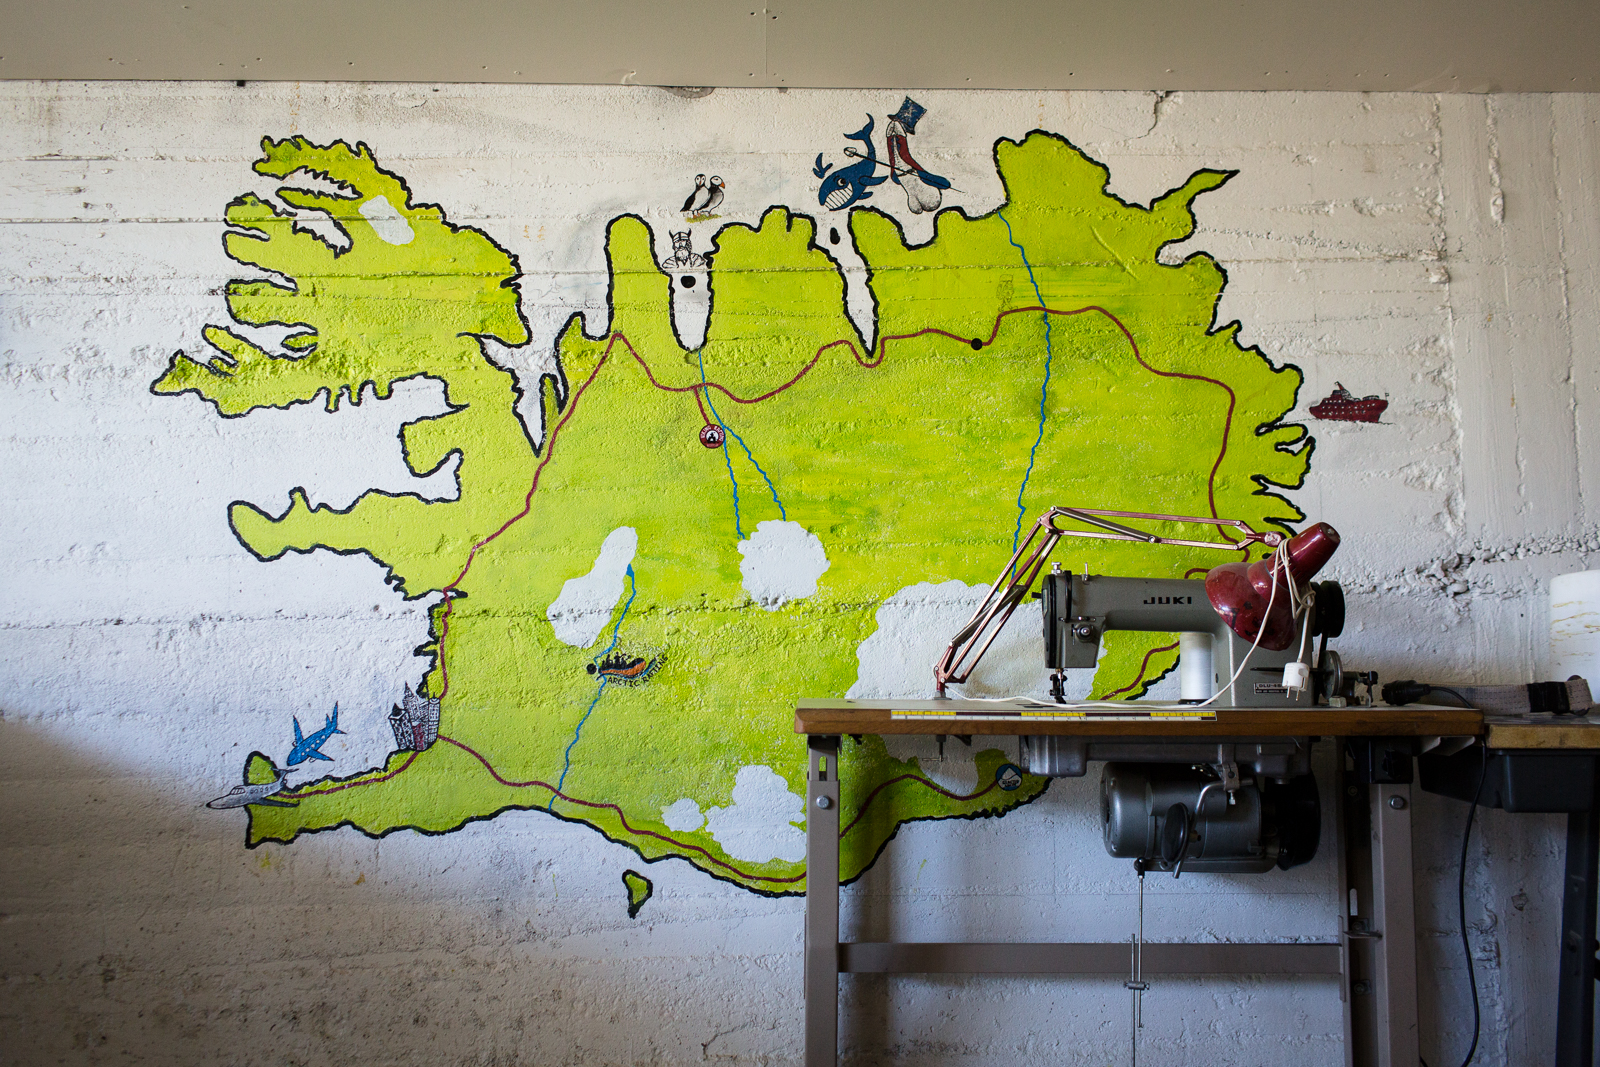  A map of Iceland is painted on a wall at a whitewater rafting business in eastern Iceland. 